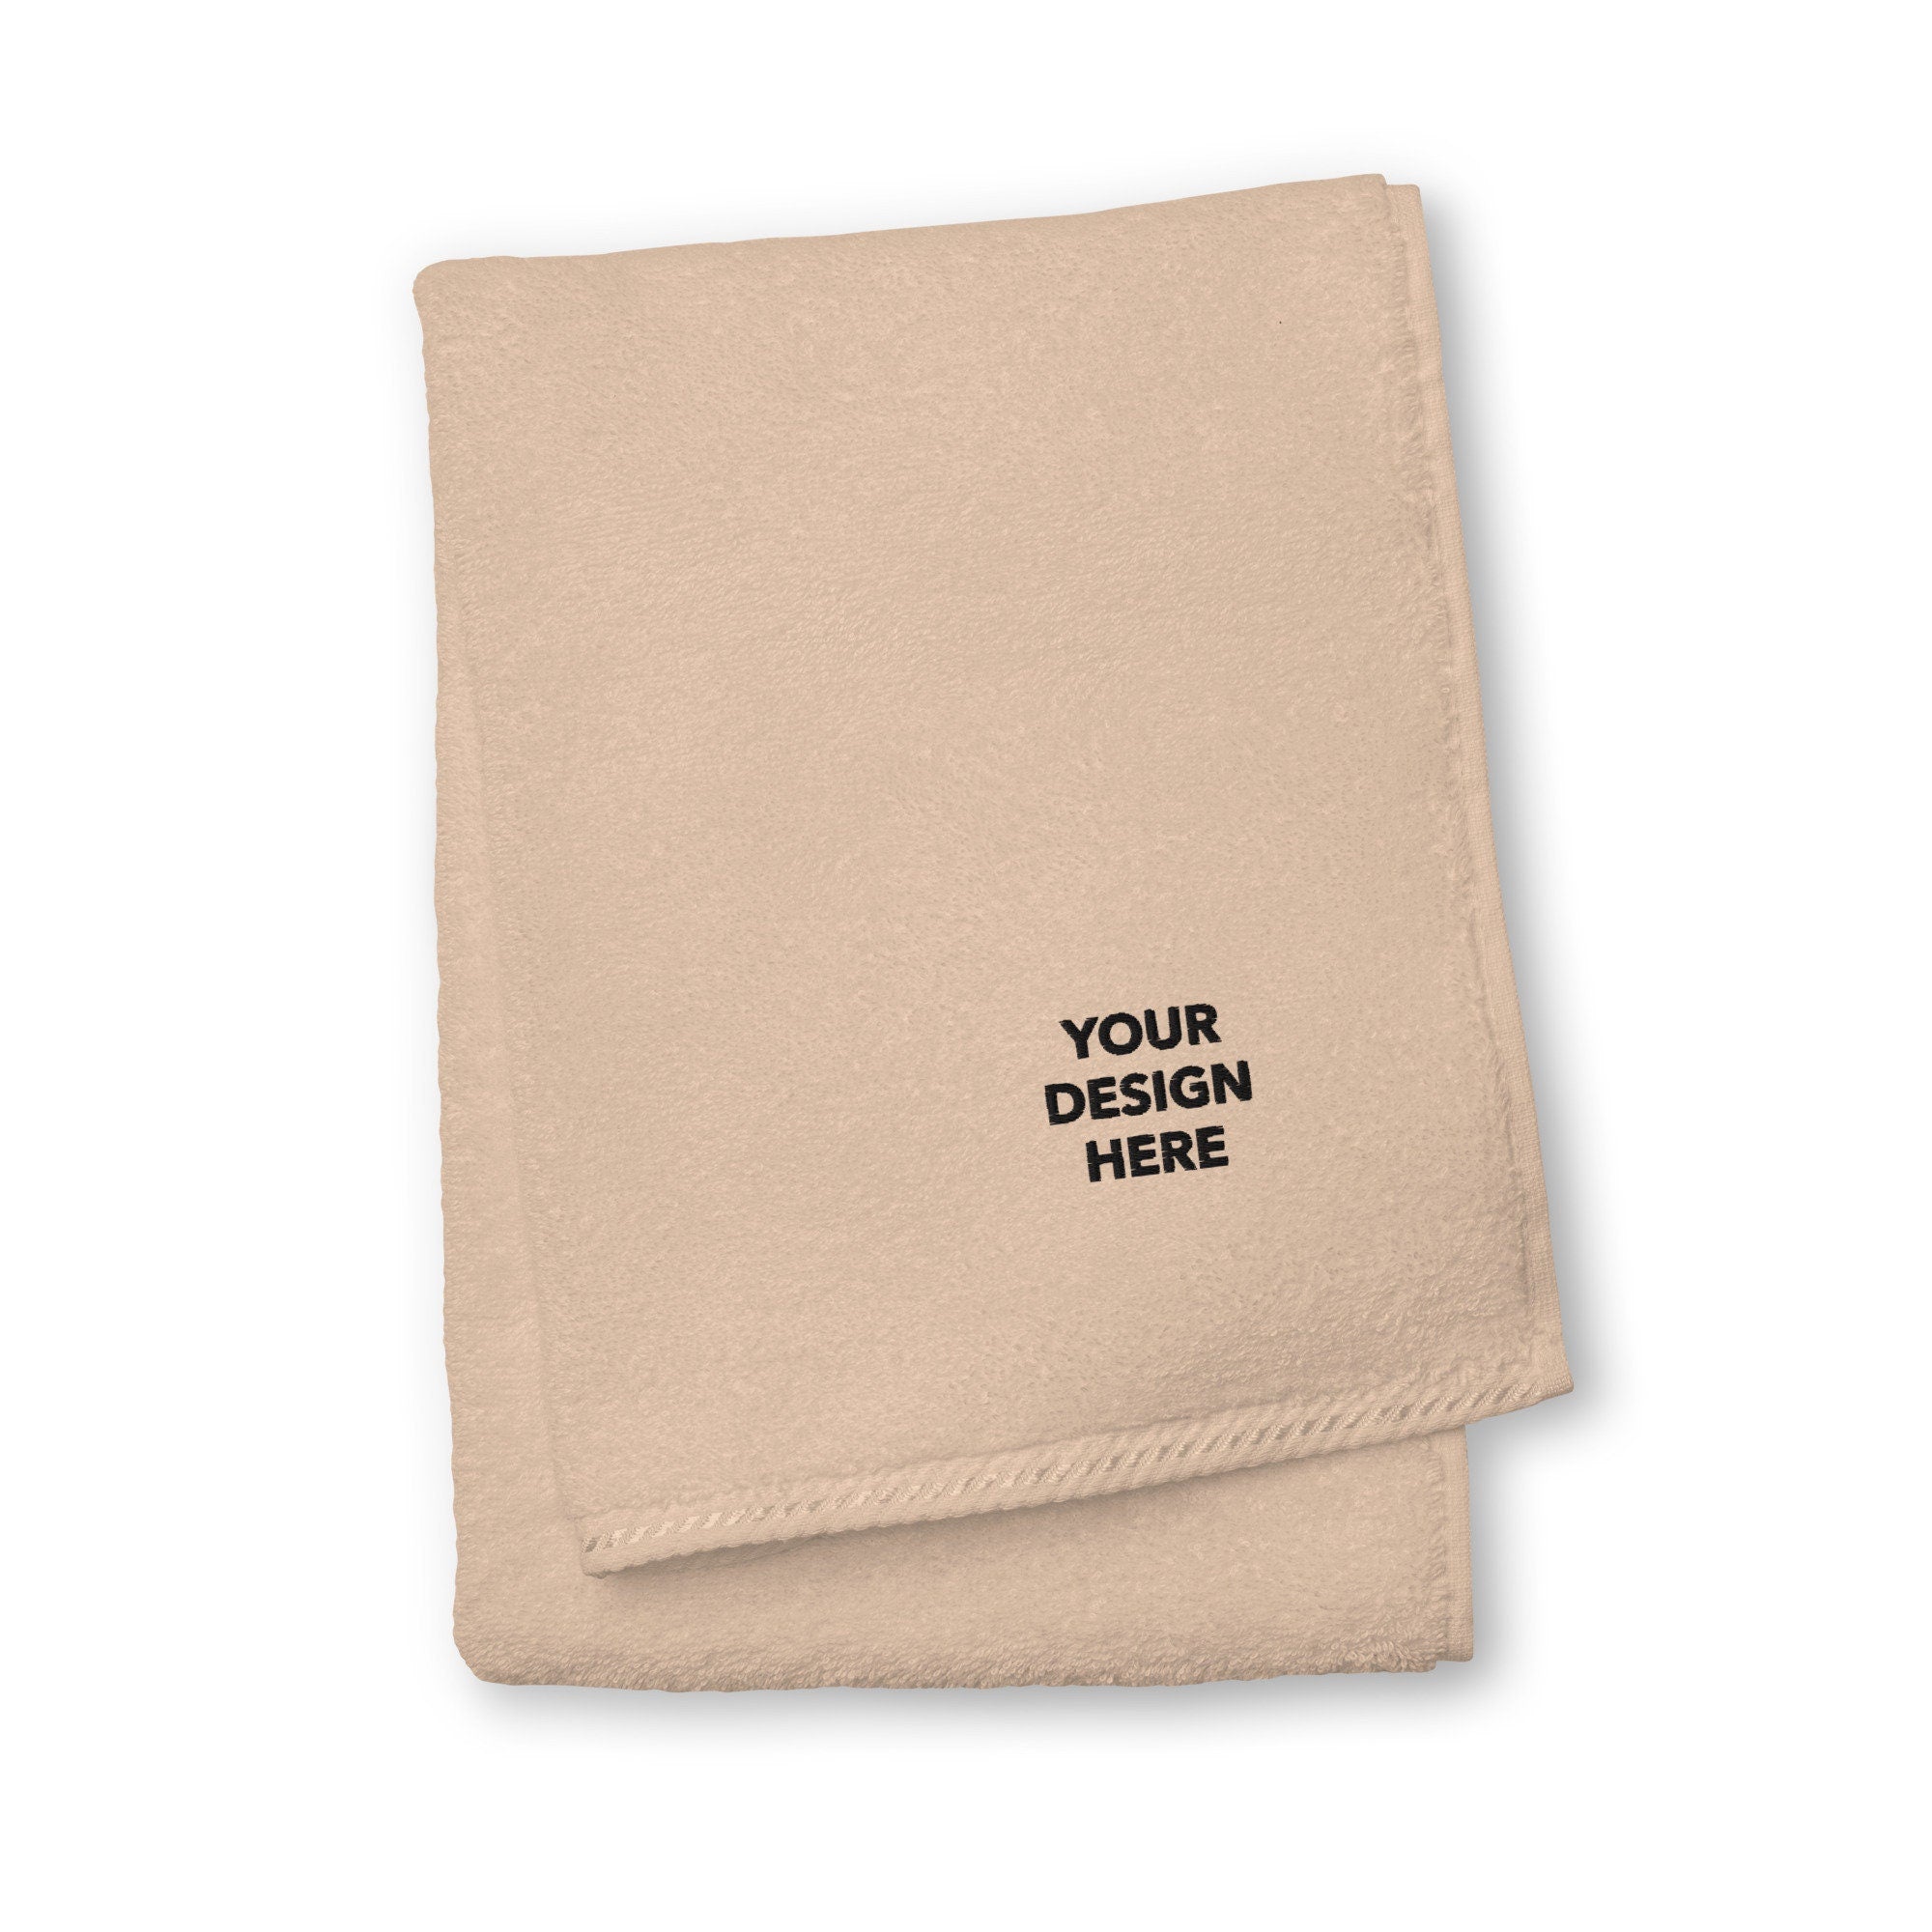 Personalized Embroidered Turkish Cotton Towel, Customized Logo Towel, Embroidery With Your Own Text or Design, Handmade Stitched Towel